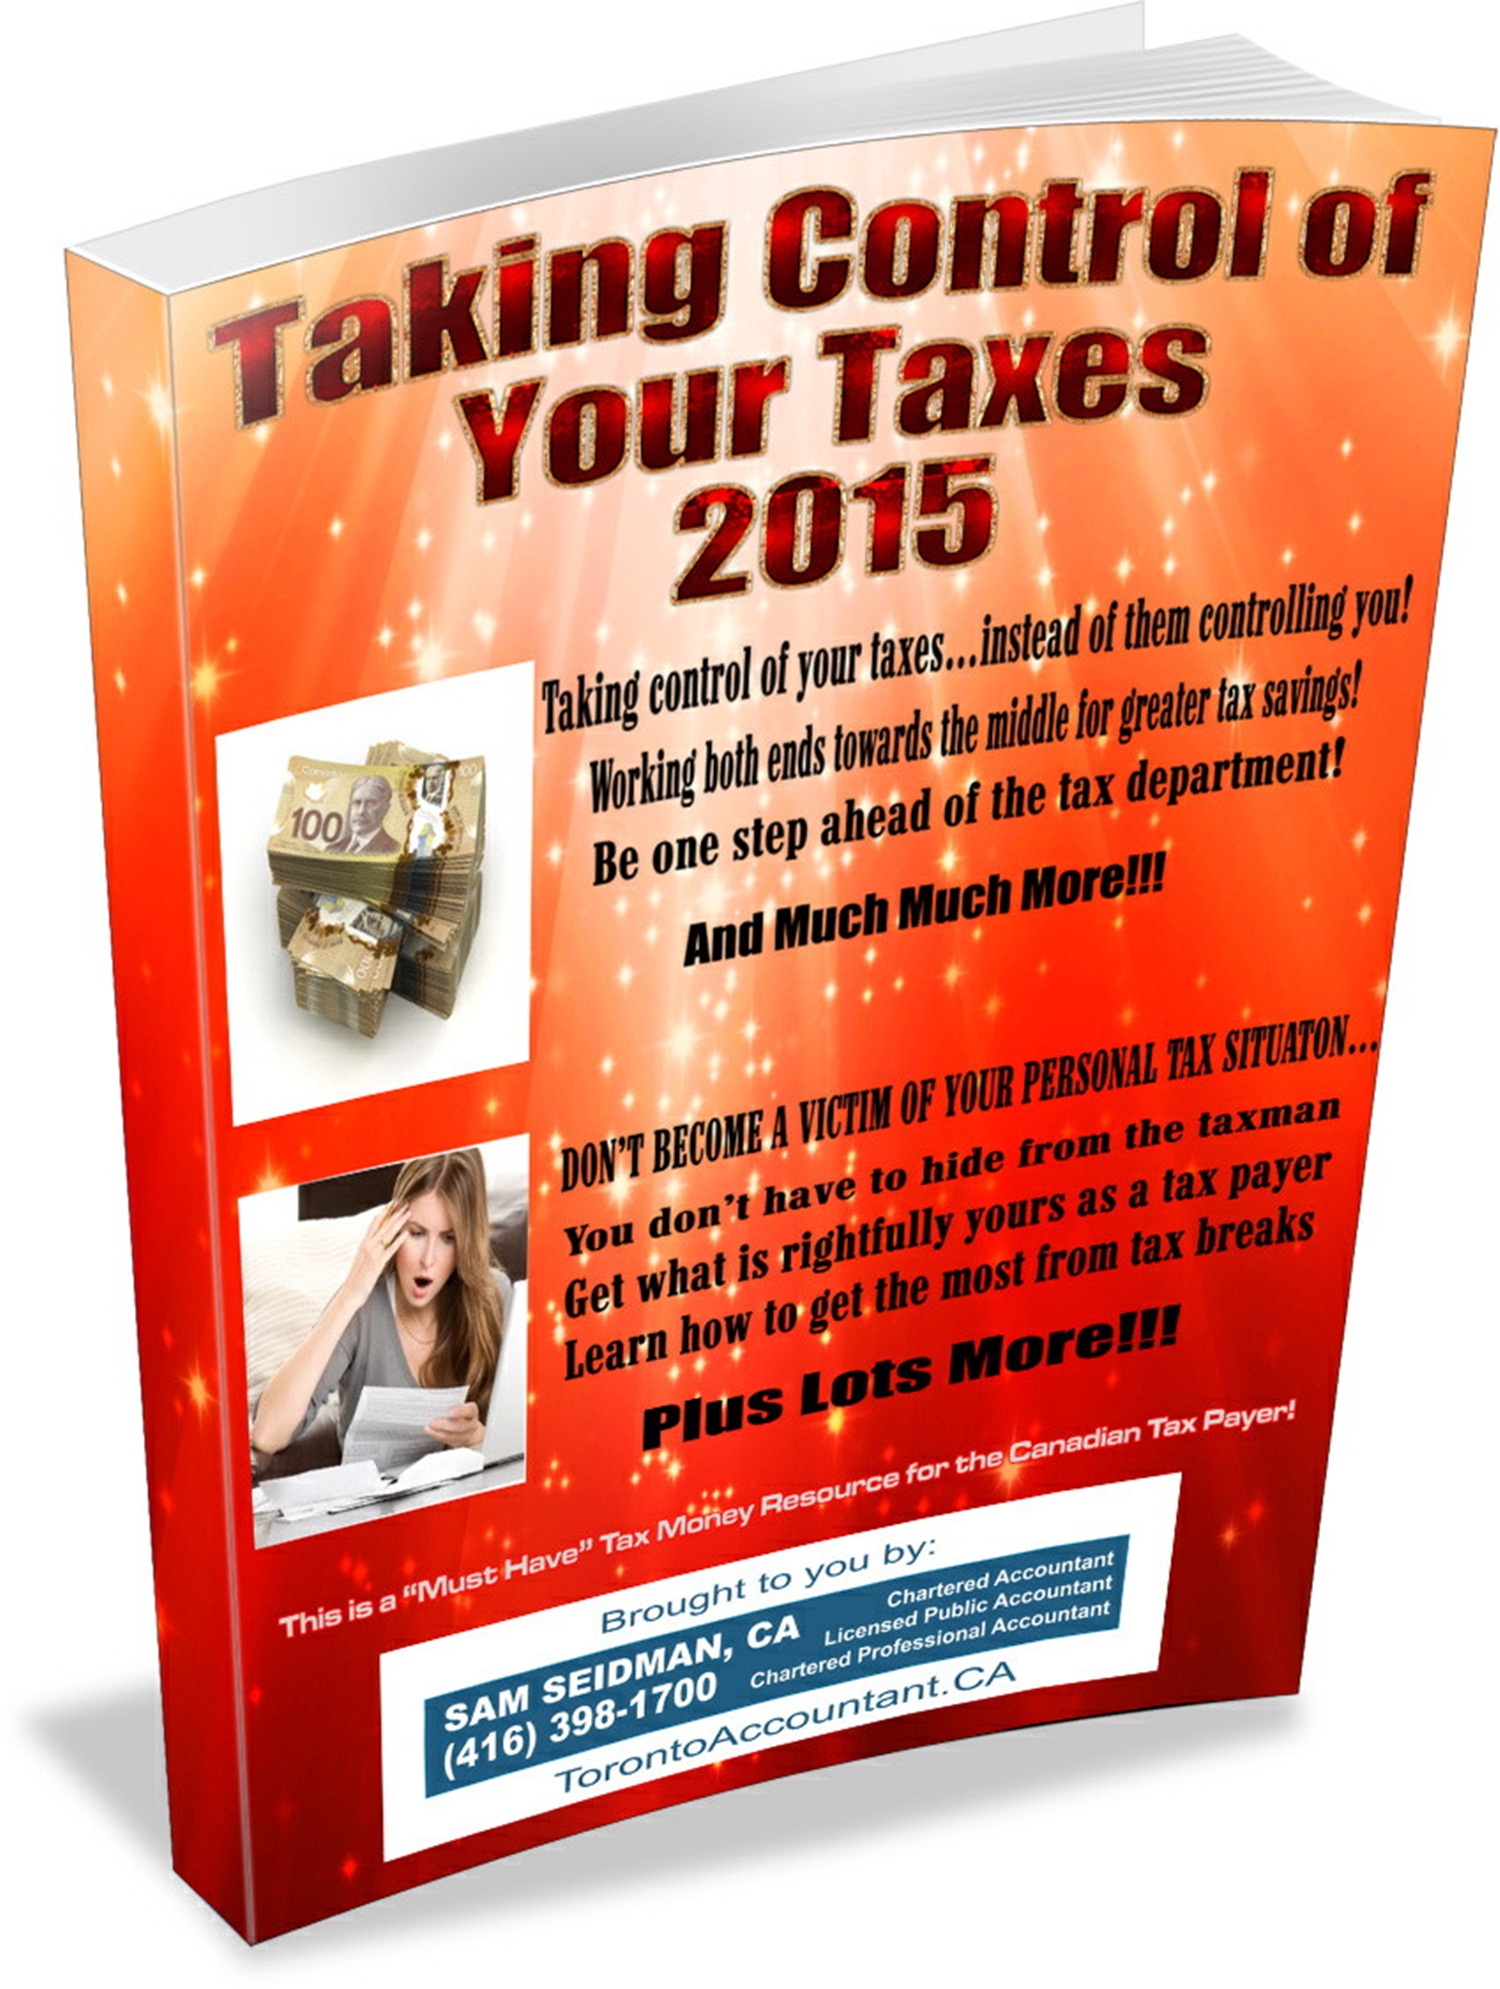 Take Control of Your Taxes 2015